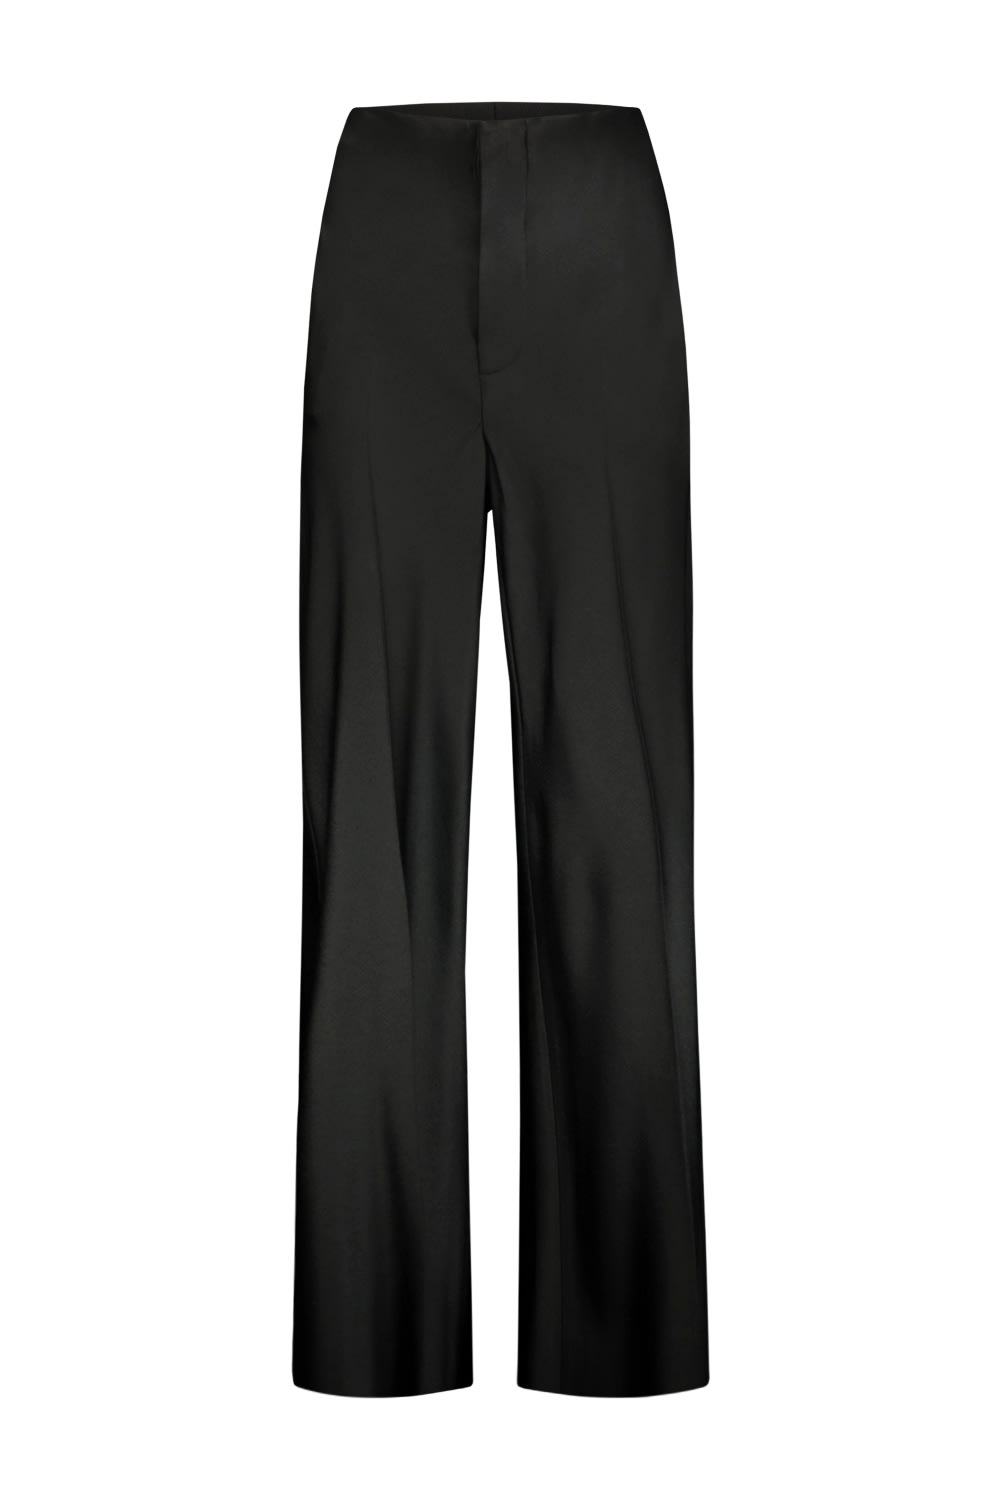 THE ROW LAZCO PANT IN SILK